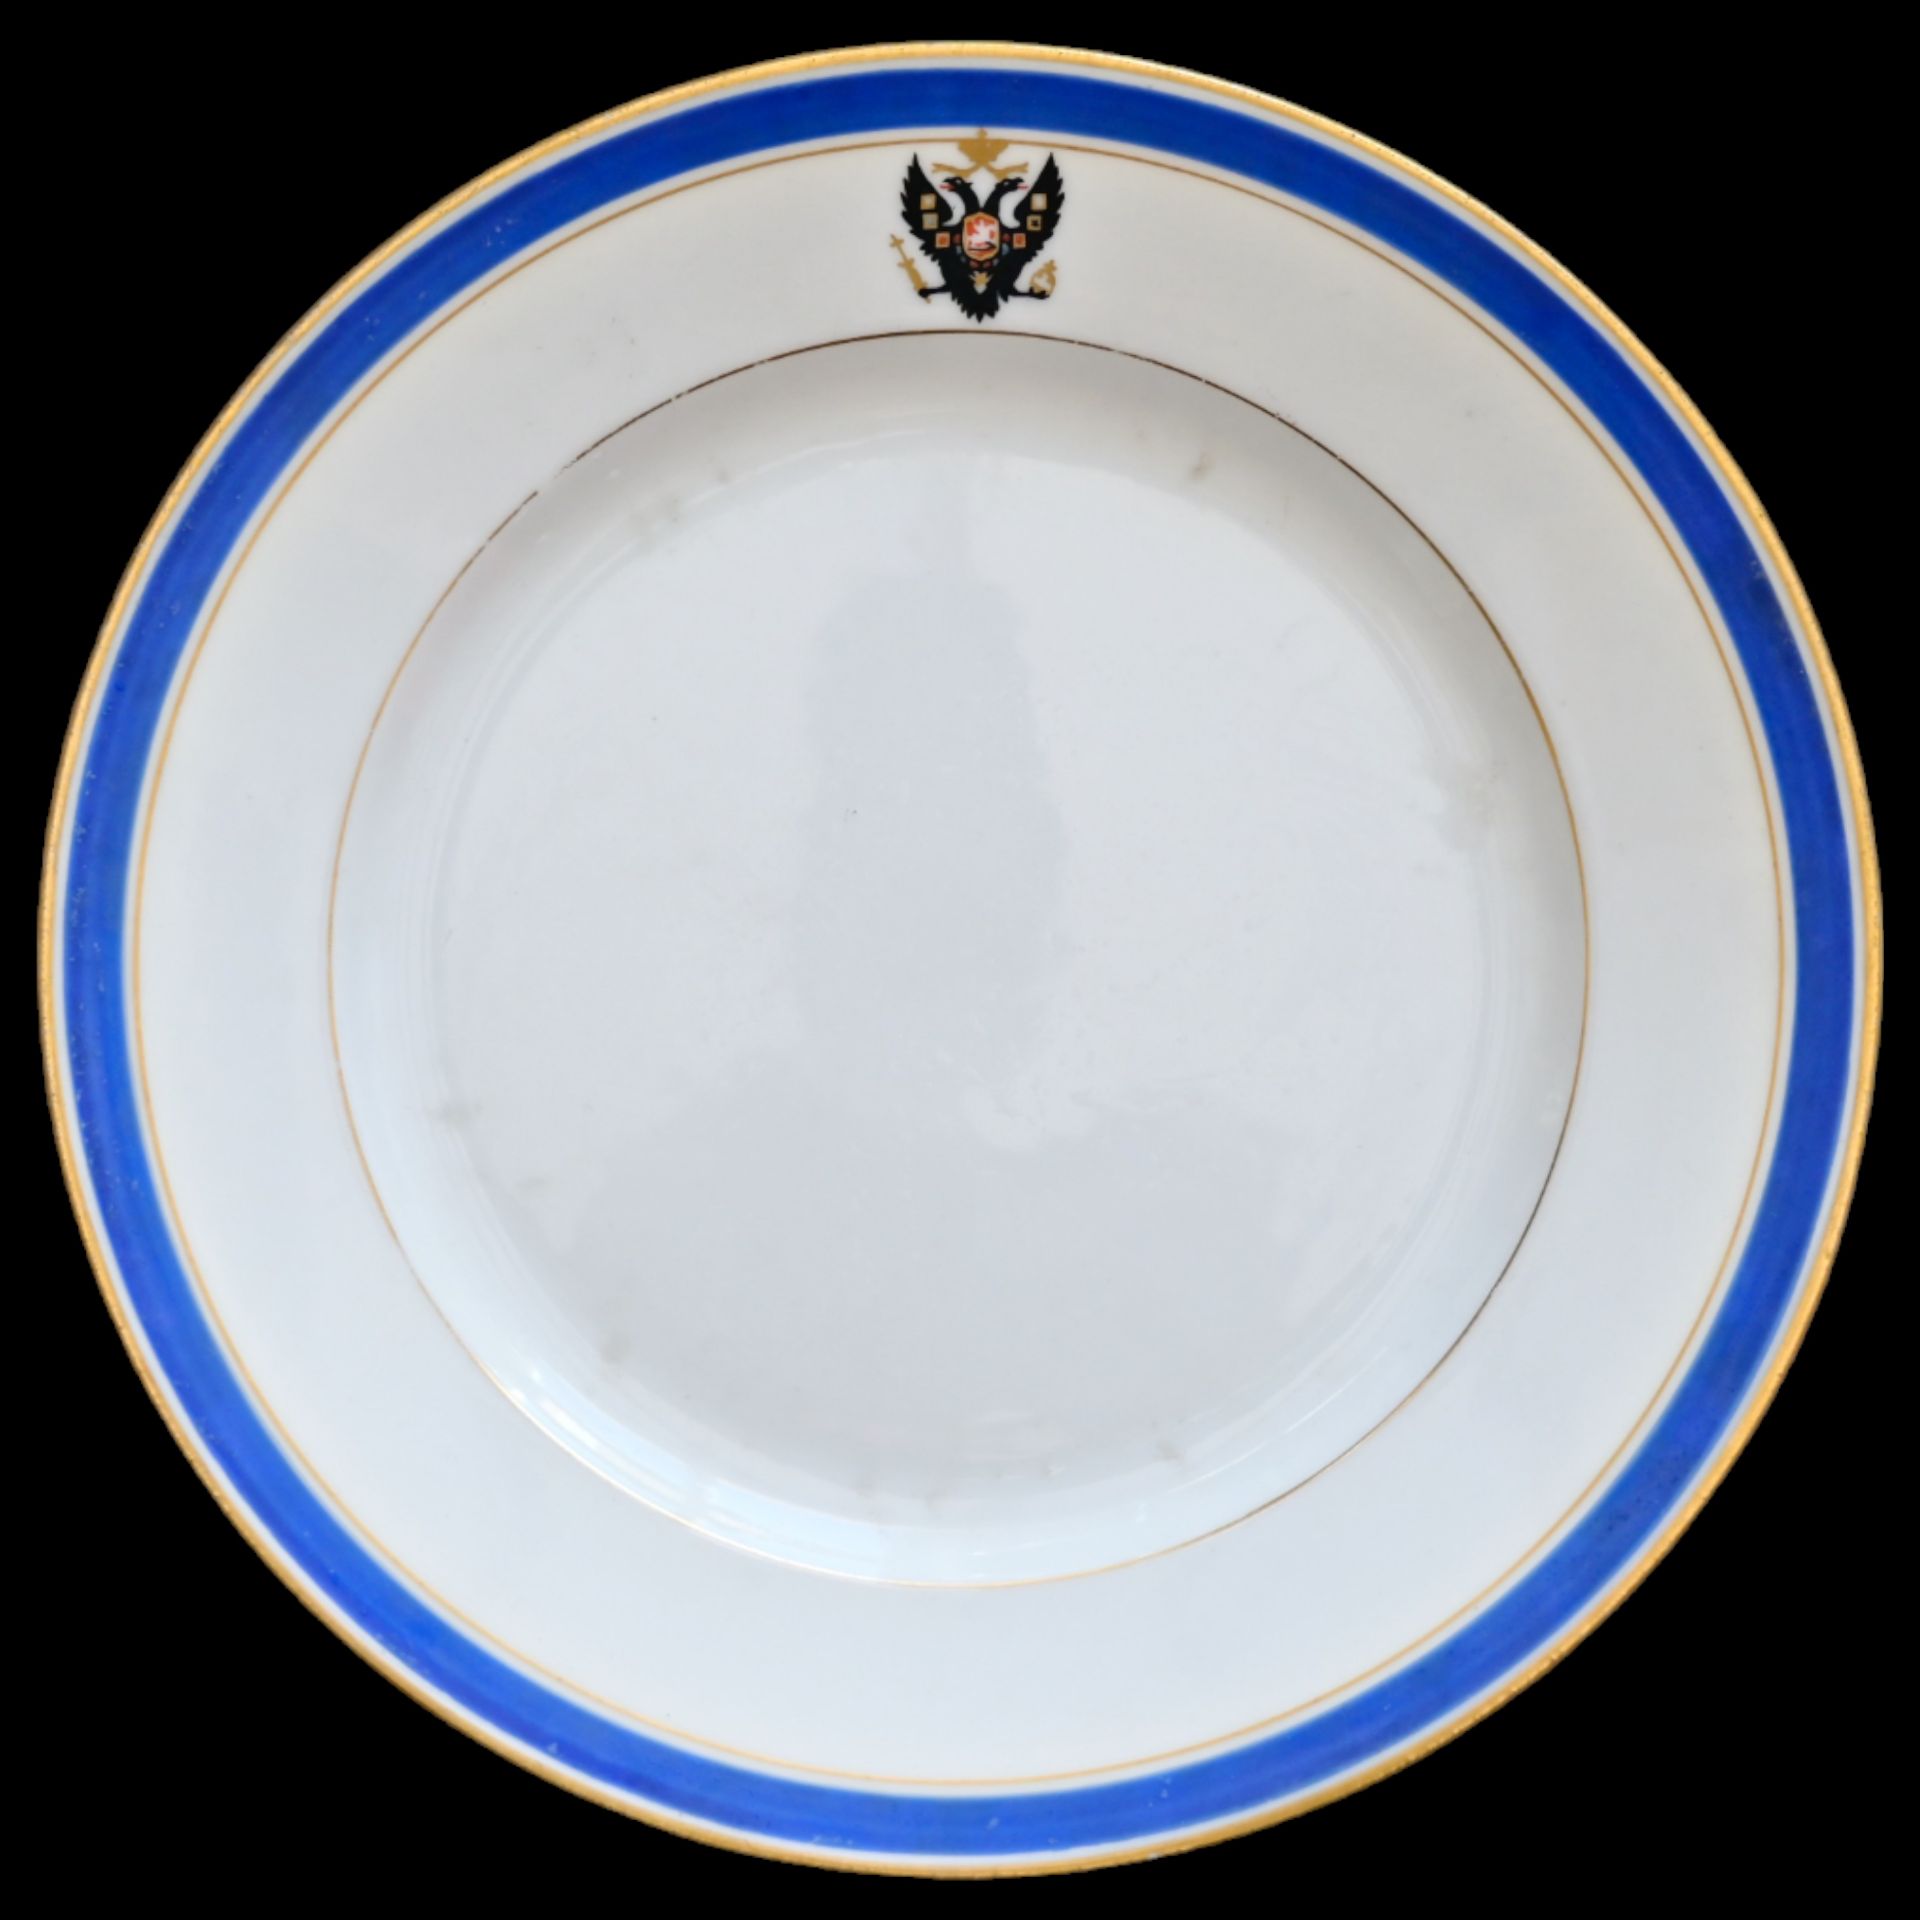 Plate from the dinner service of the Russian Emperor Nicholas II from the yacht "Alexandria", 1885. - Image 2 of 4